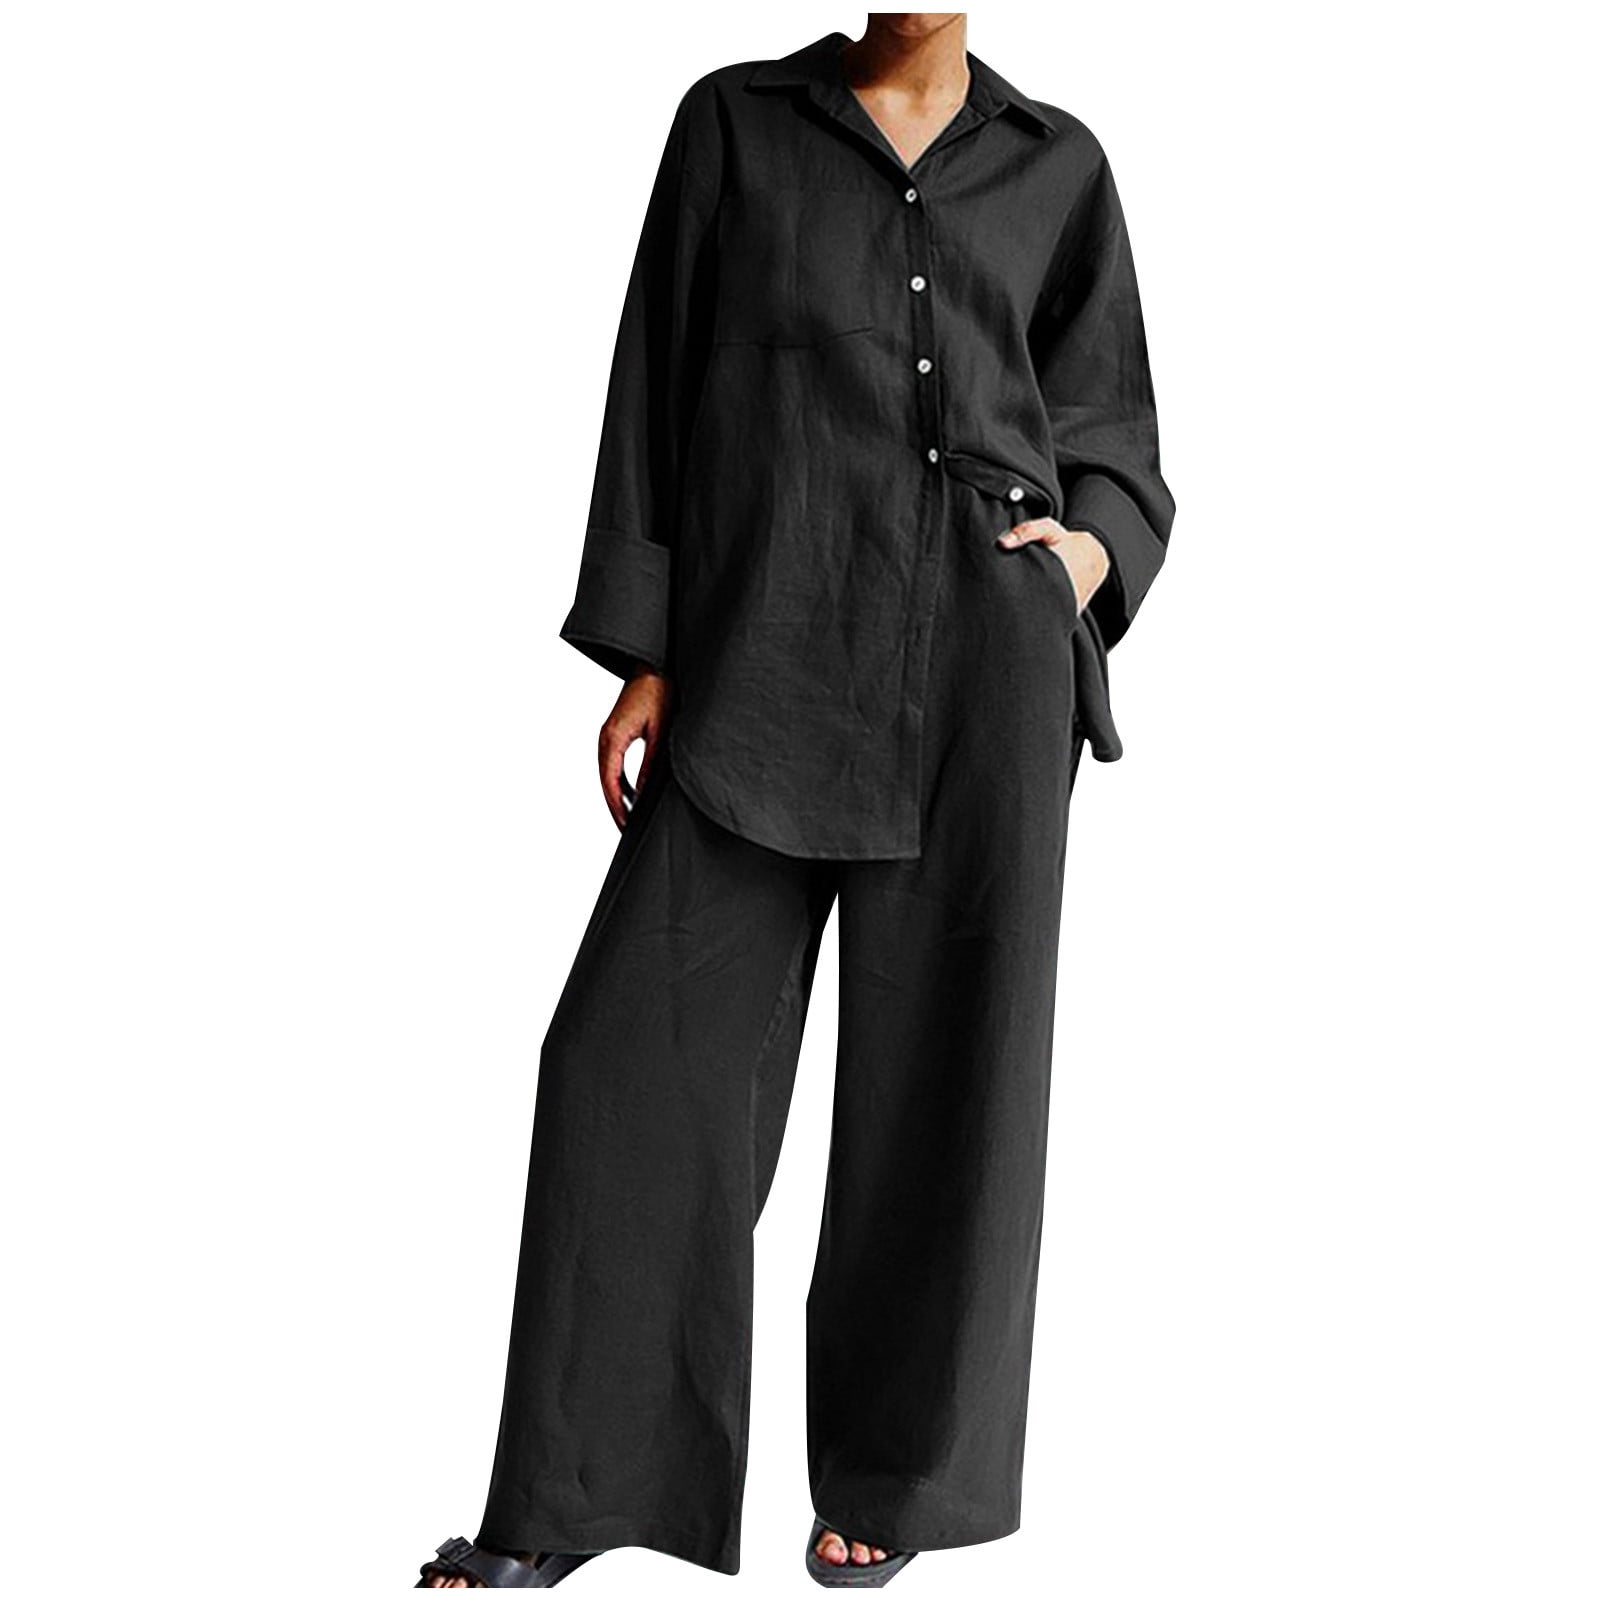 YYDGH 2 Piece Outfits for Women Cotton Linen Casual Loose Long Sleeve  Button Down Shirt and Wide Leg Pants Sets Loungewear Black XXL